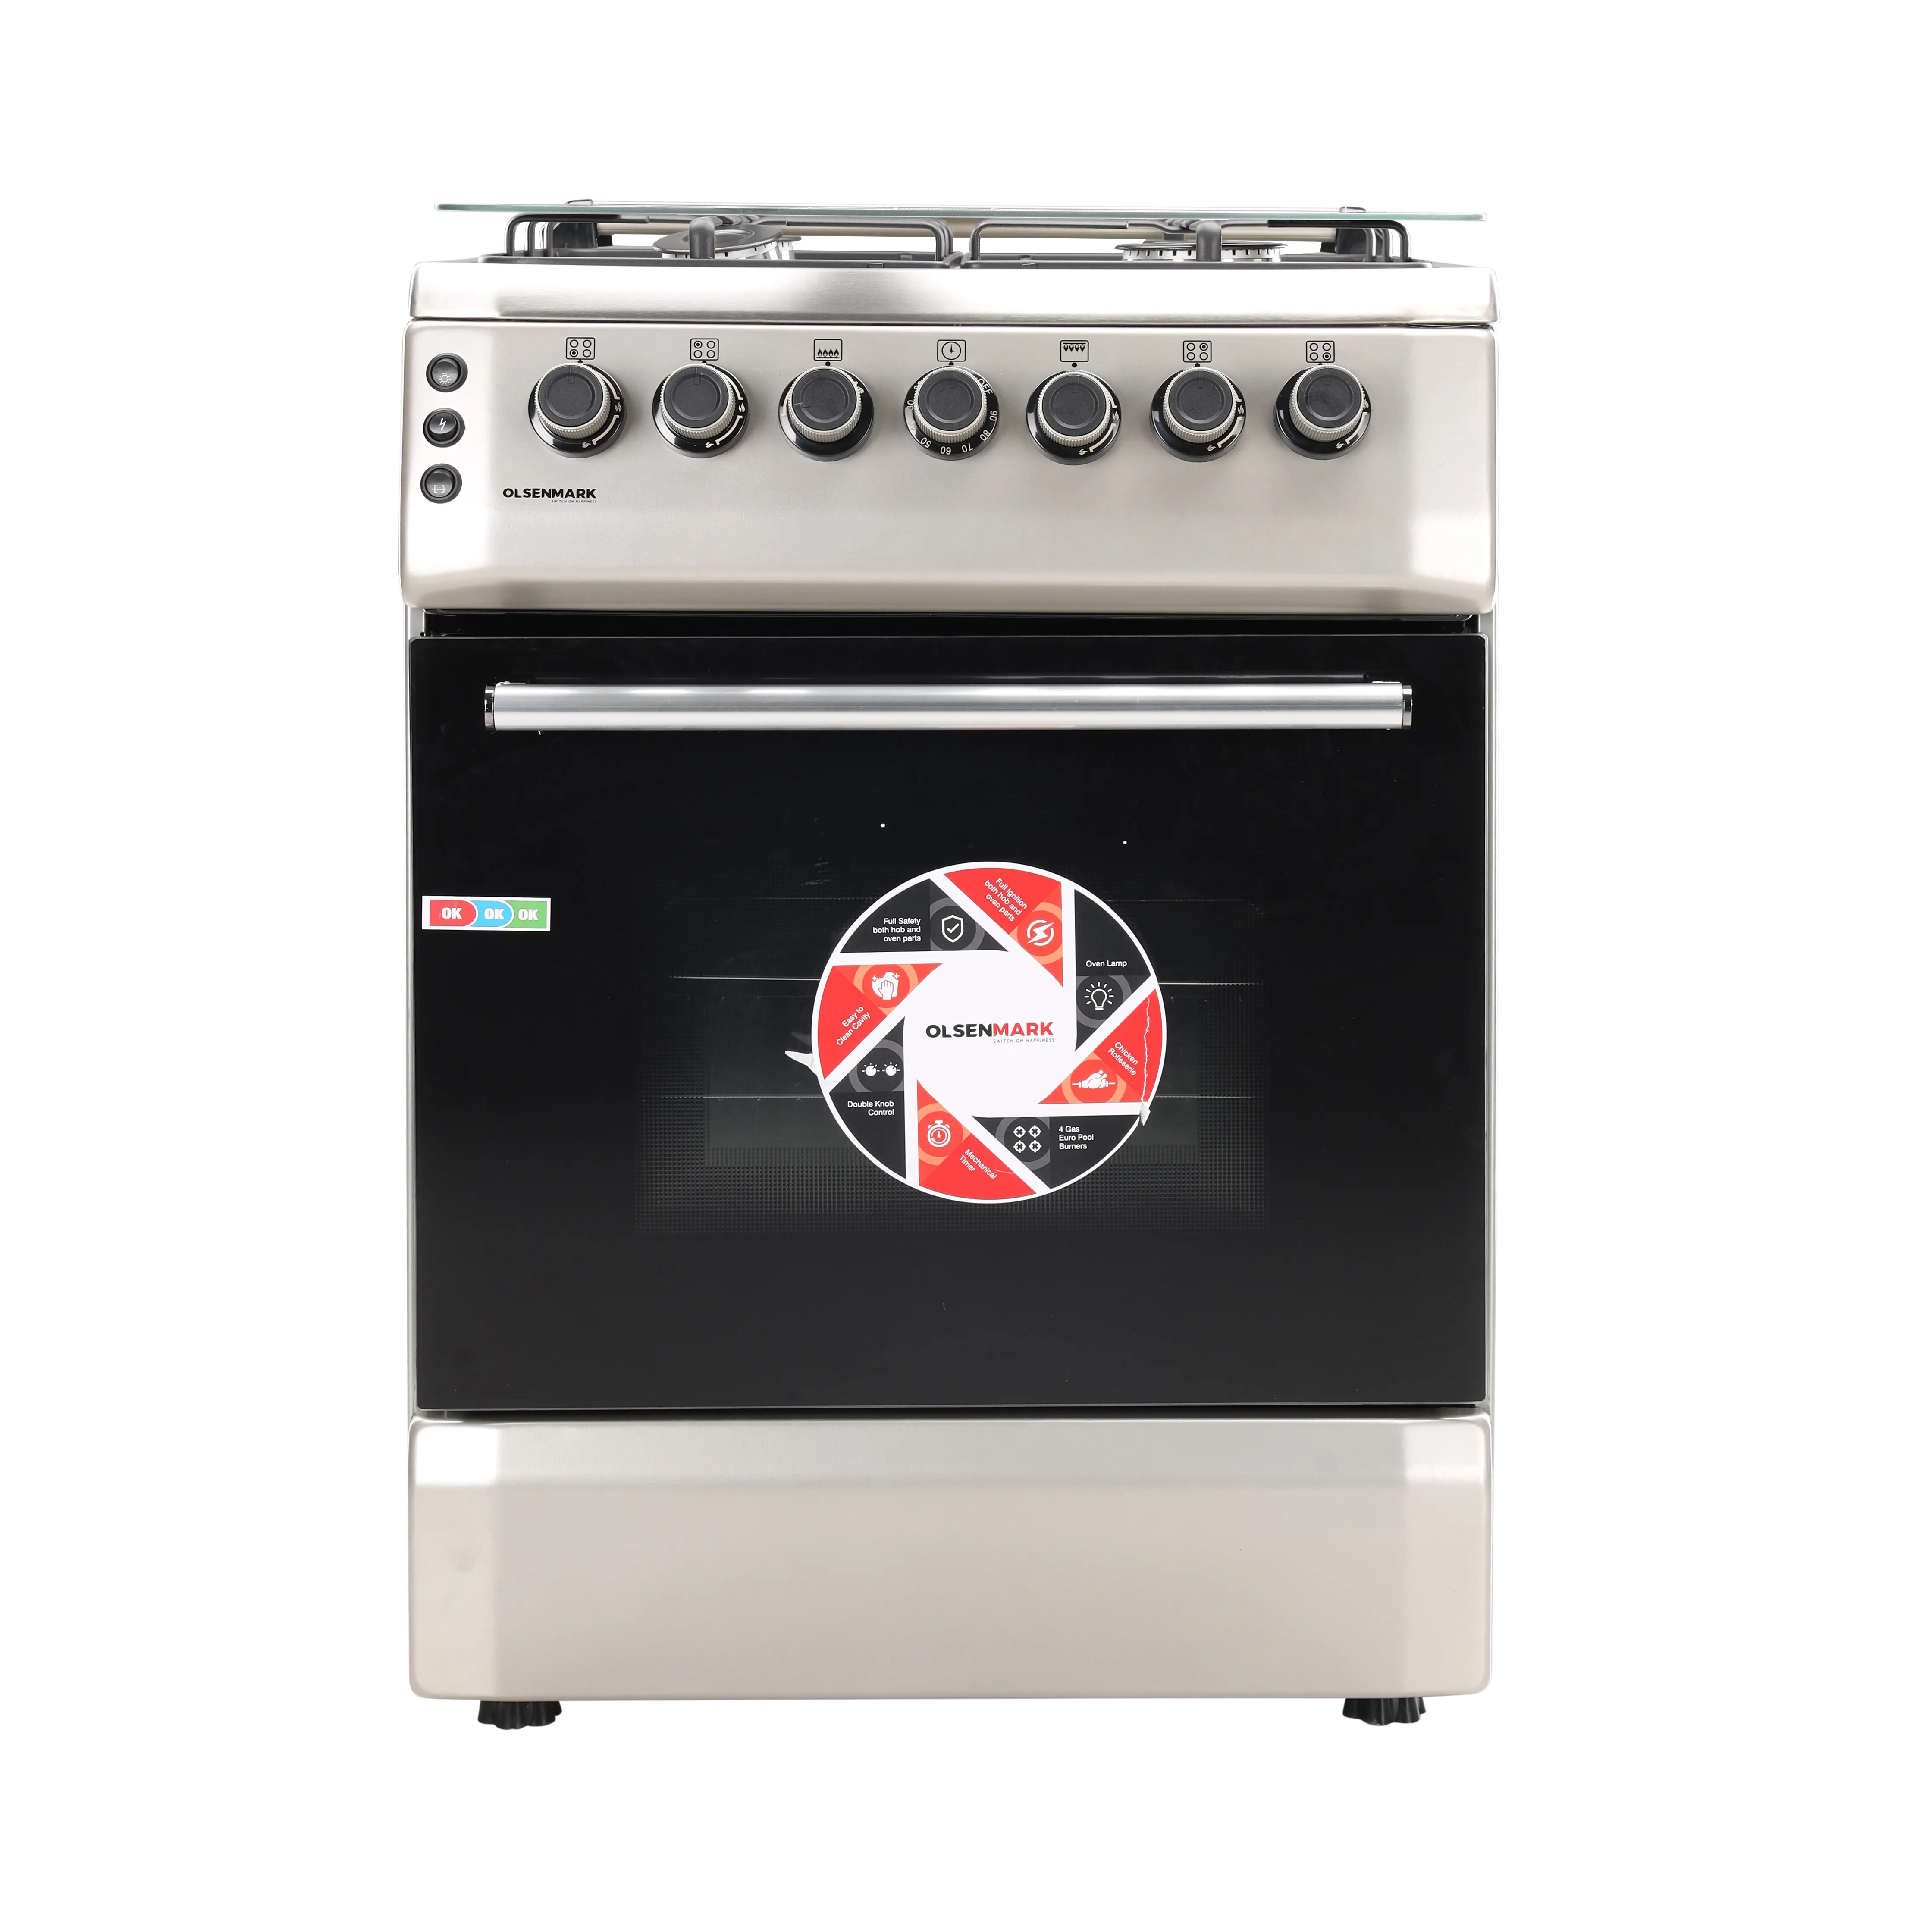 Olsenmark 60 60 Cm Gas Cooking Range - 4 Gas Burners Convection Single Grill/Oven, Heavy Duty Metal Knobs Oven/Grill Function Glass Lid, Oven Lamp Mechanical Timer Perfect for Cook, Bake & Gr